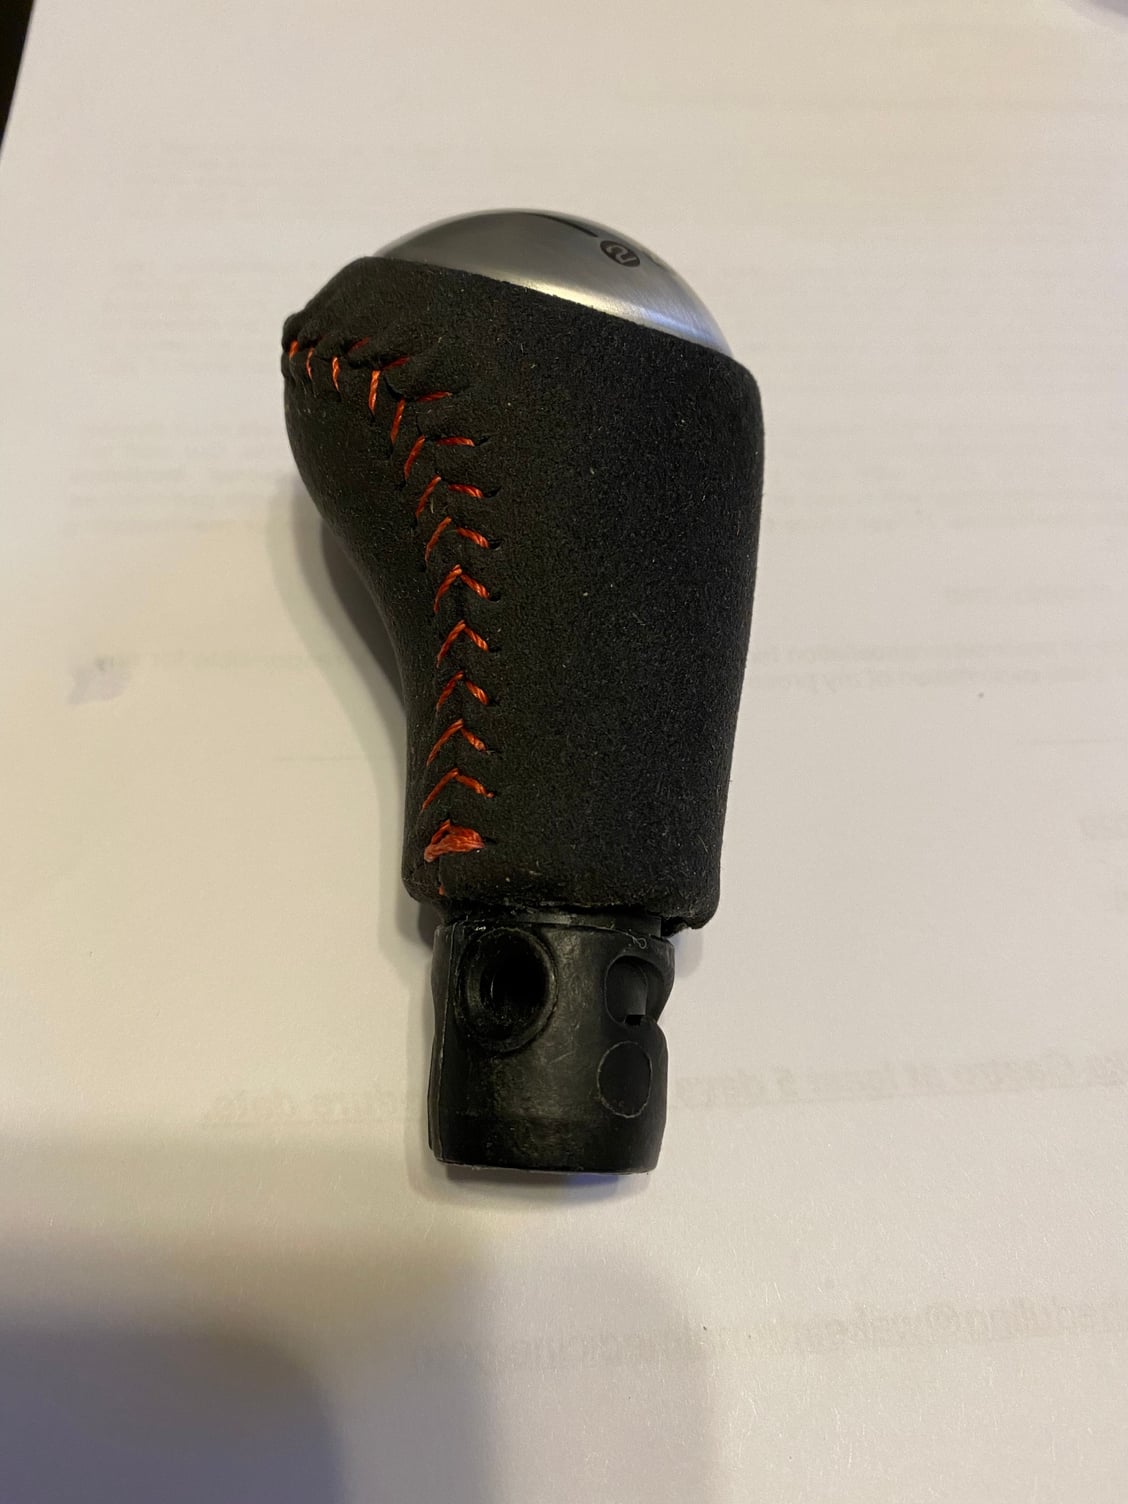 FS (For Sale) FS: Centennial Edition Suede Shift Knob with Red ...